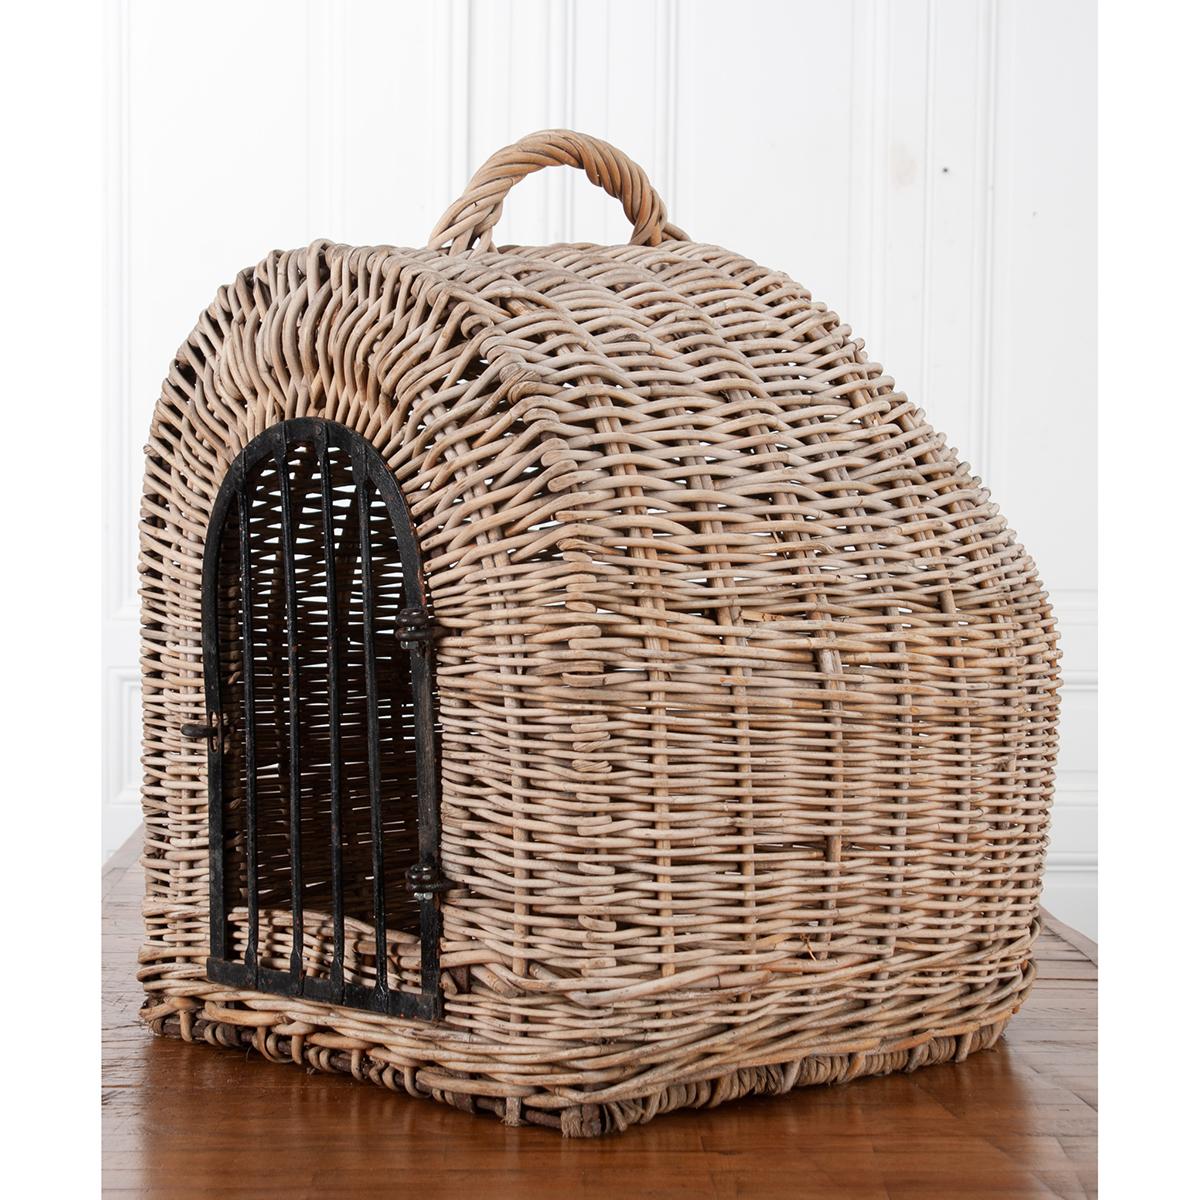 This is a unique hand-woven wicker animal carrier that can be used to tote your beloved pet or as perfectly rustic decor. The beautifully light-colored wicker is strong and fitted with the original metal gate and a tightly woven handle for easy